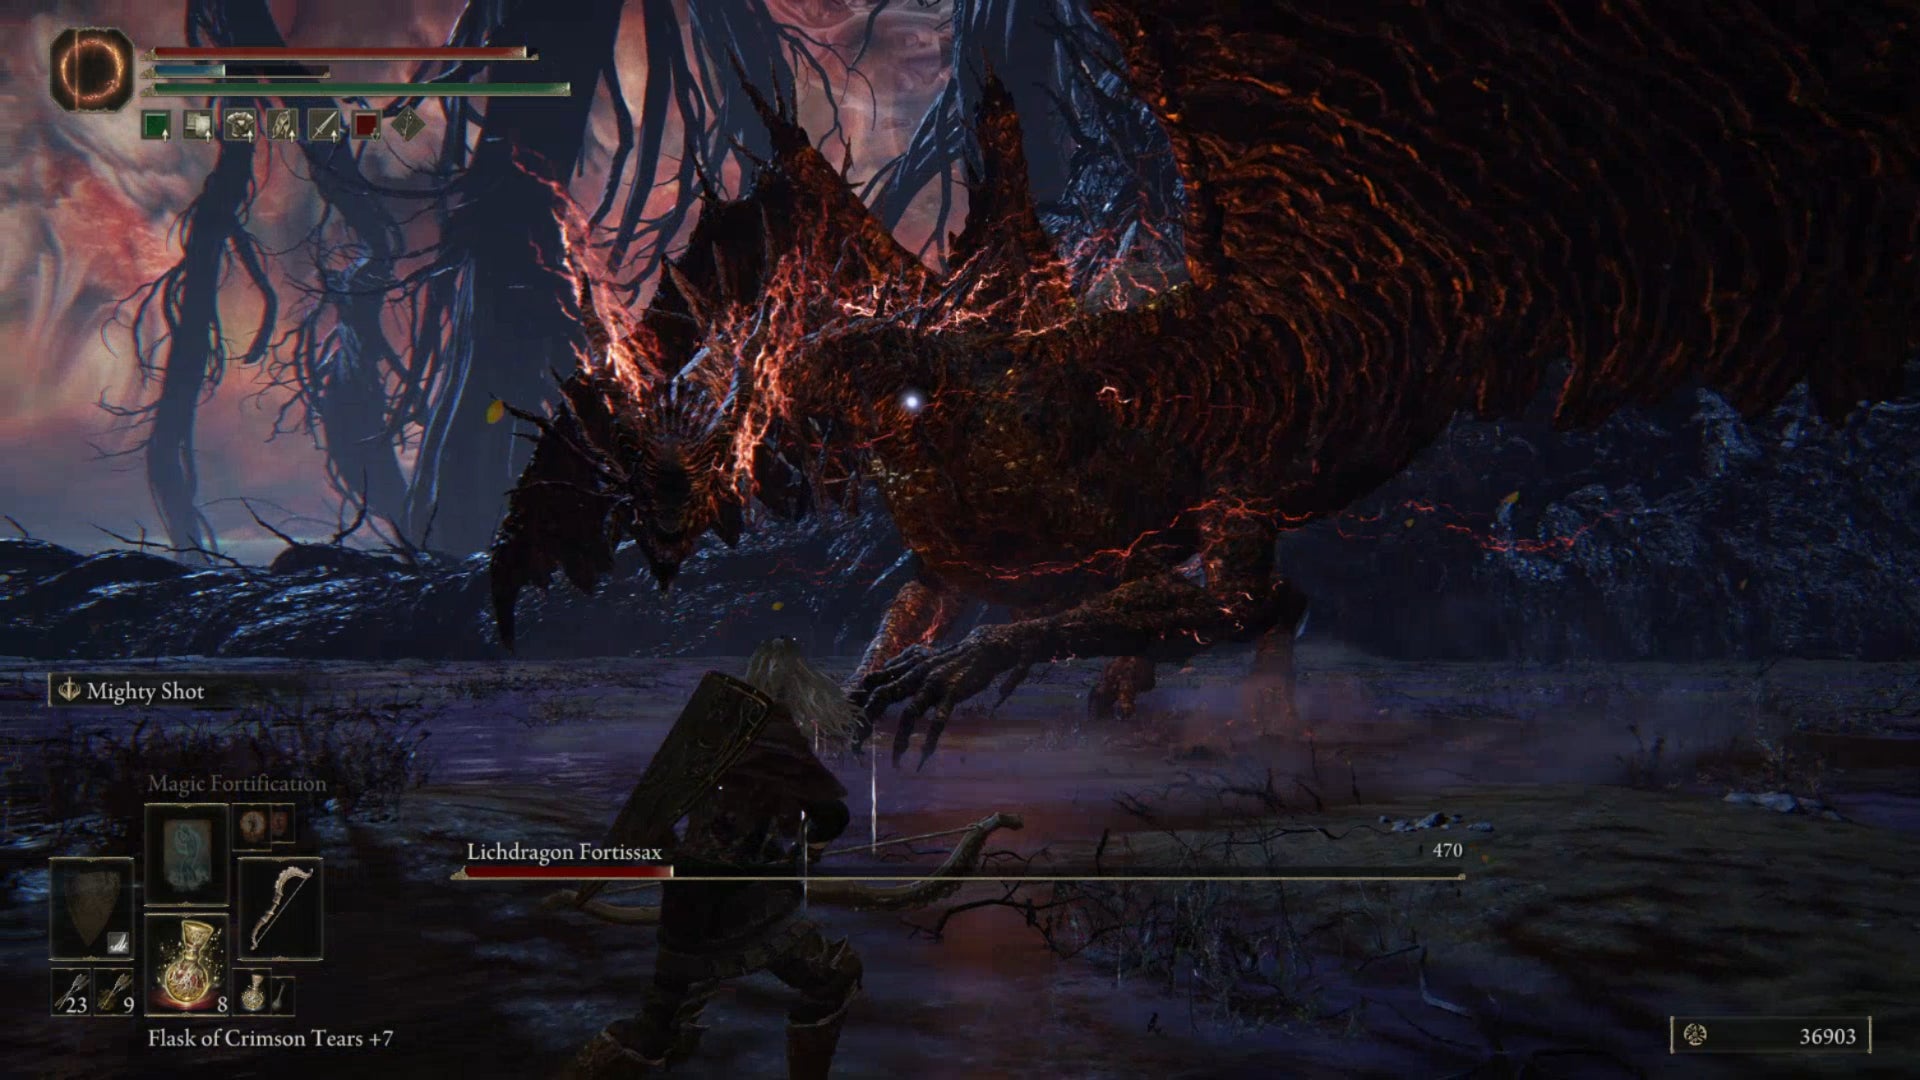 The player fights the Lichdragon Fortissax in Elden Ring.